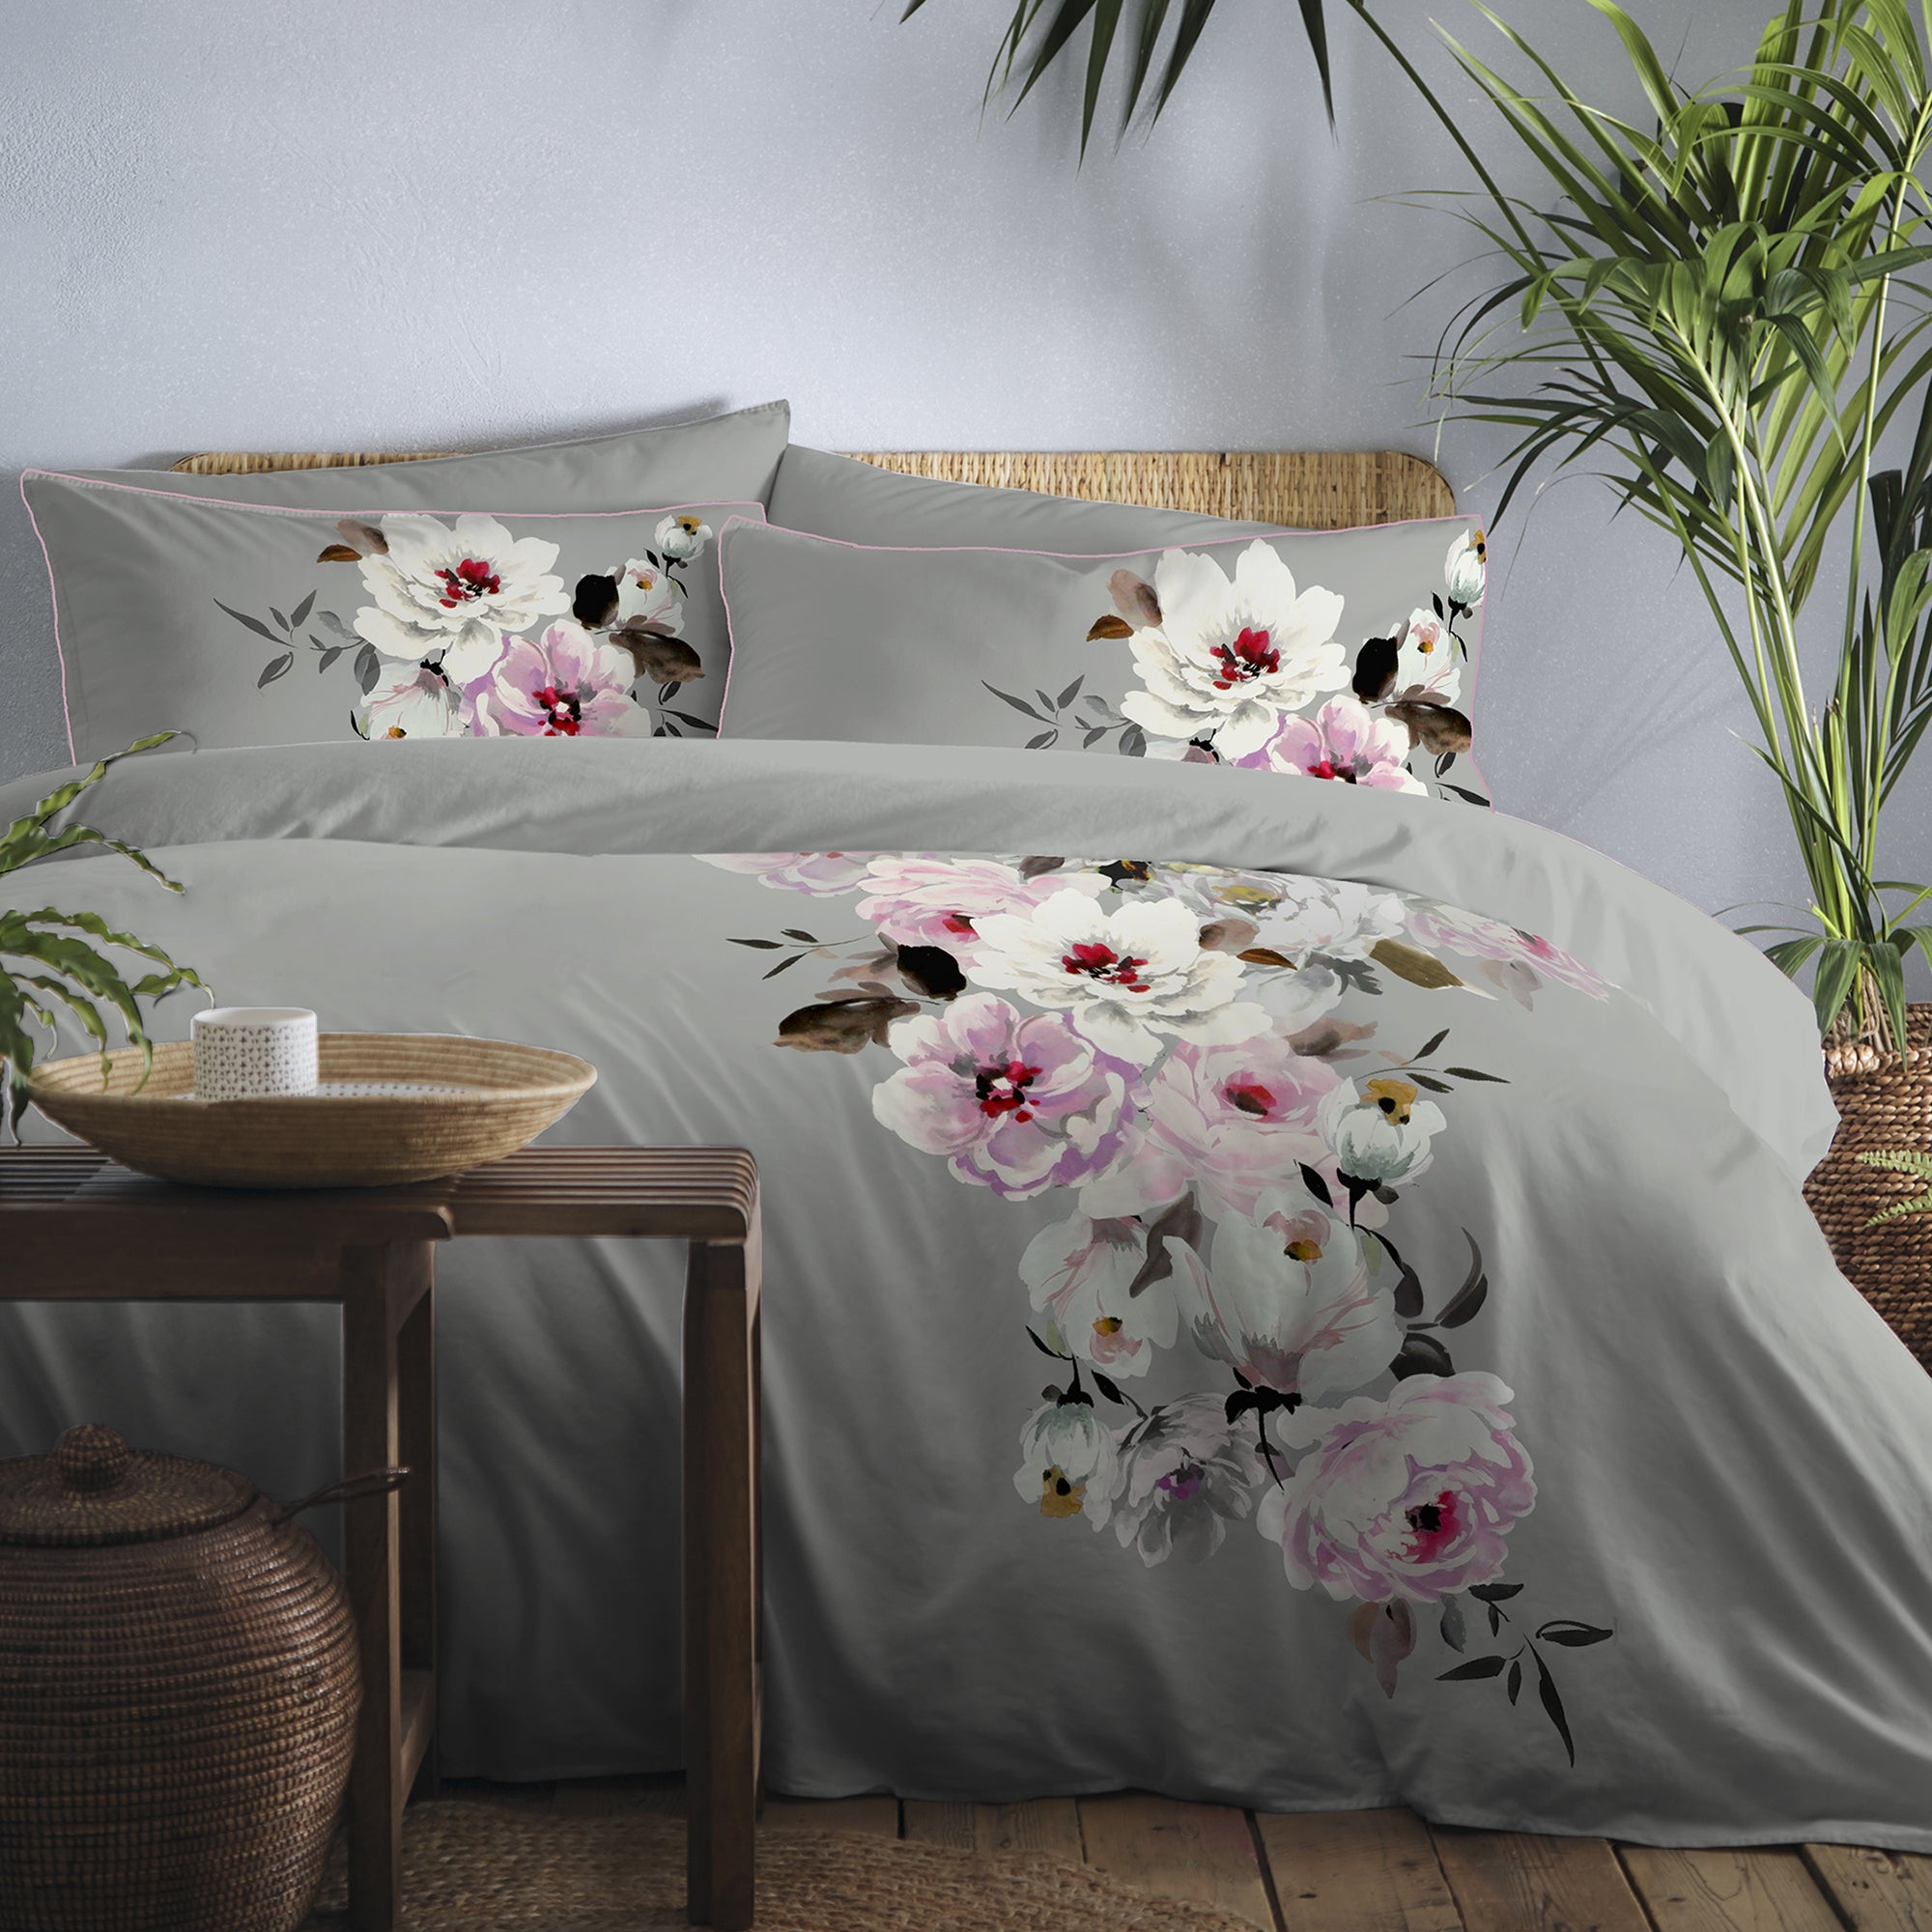 Duvet Cover Set Valentina by Appletree Promo in Grey